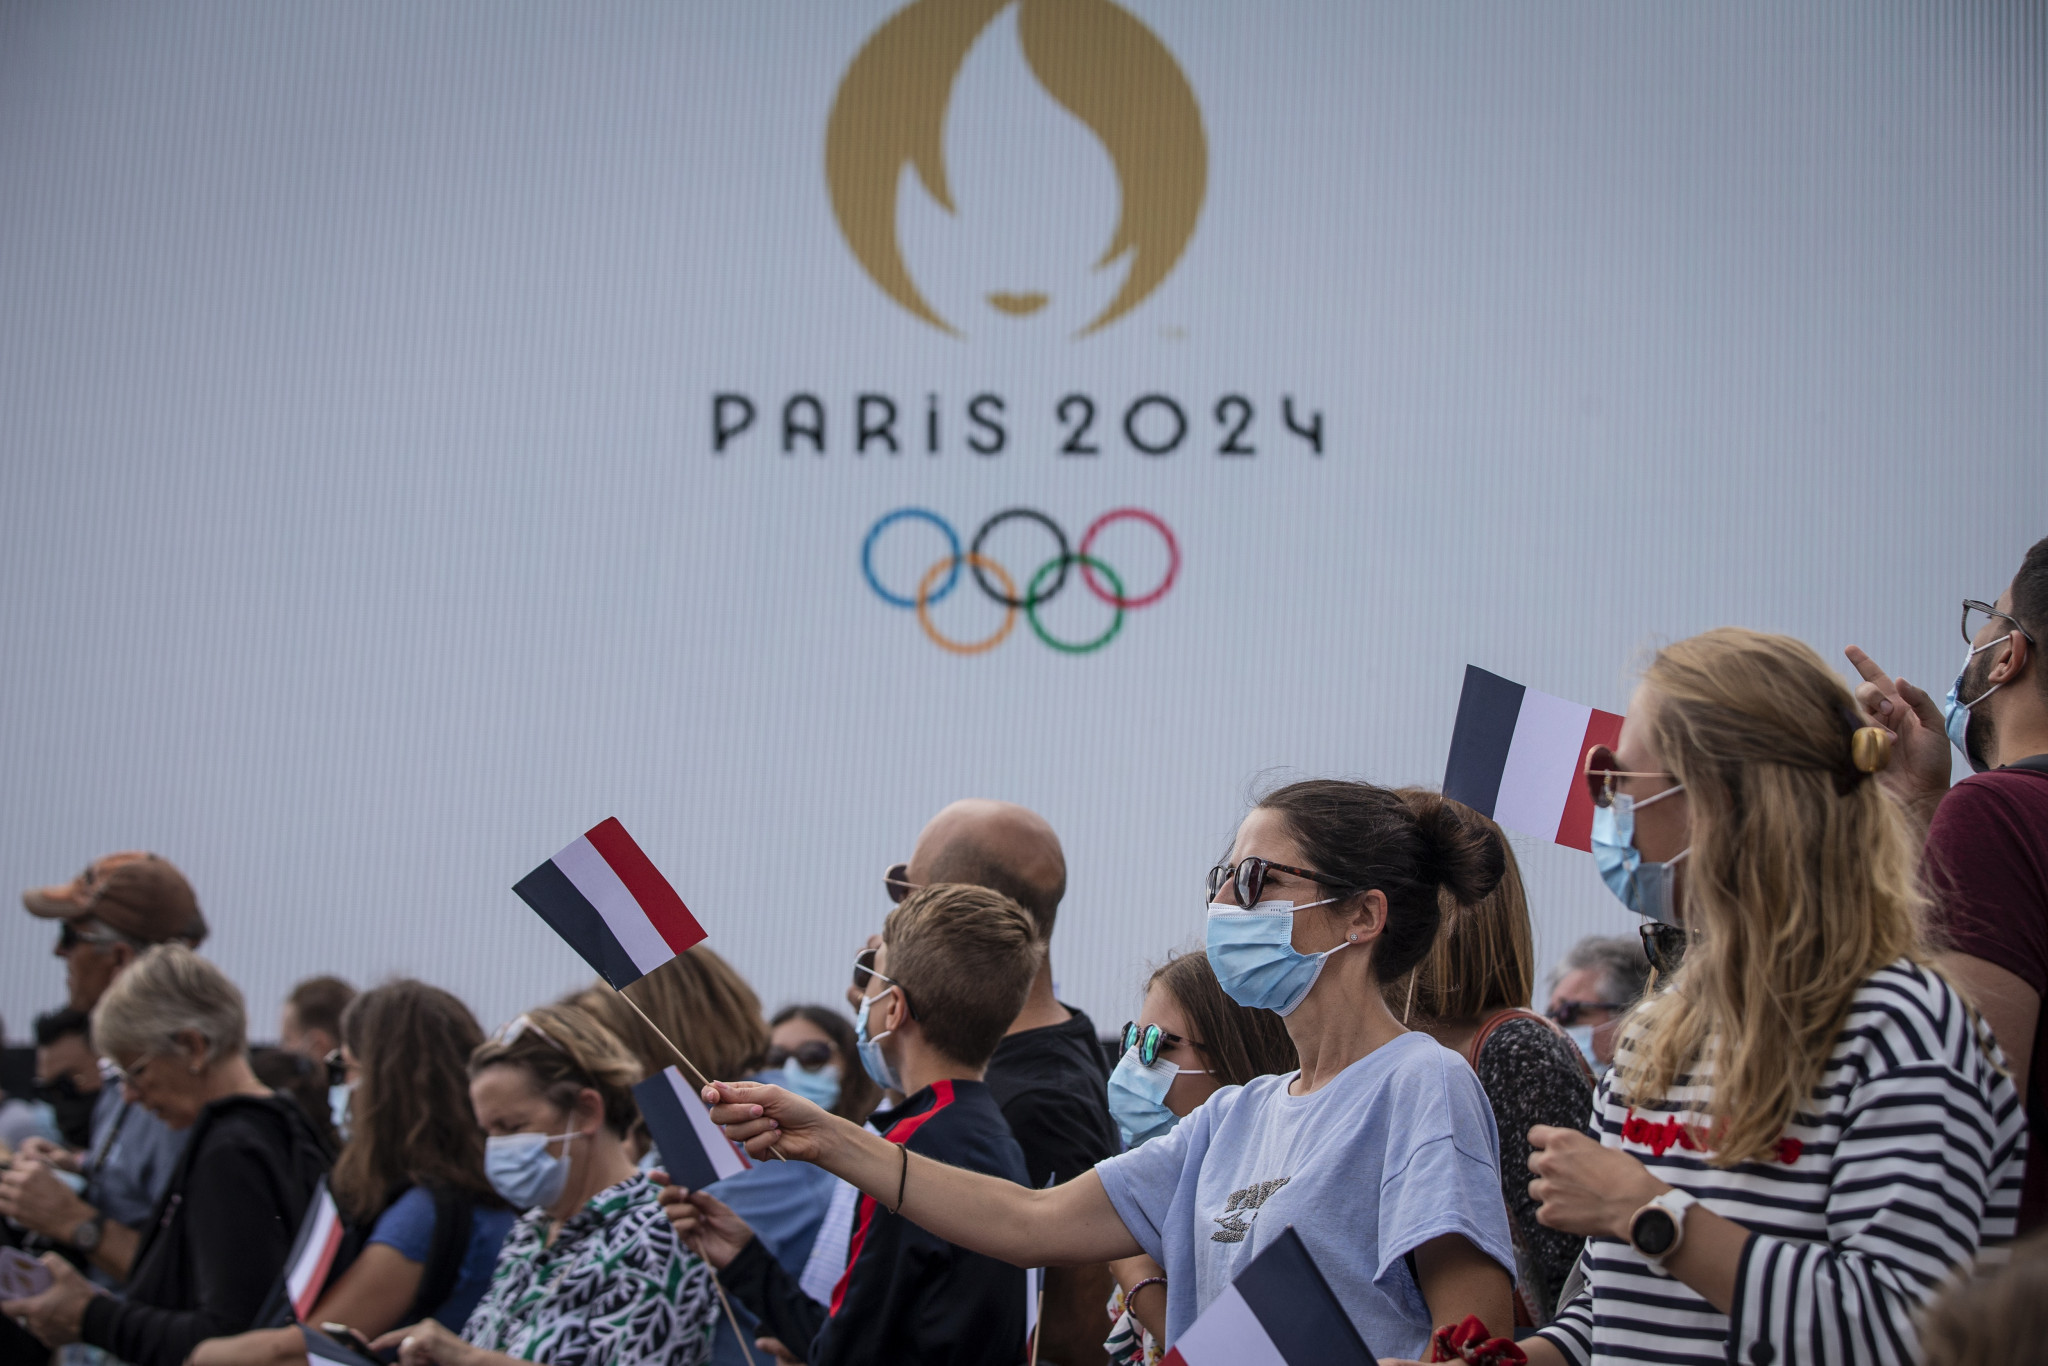 Paris 2024 will begin developing the route for the Torch Relay next month ©Getty Images